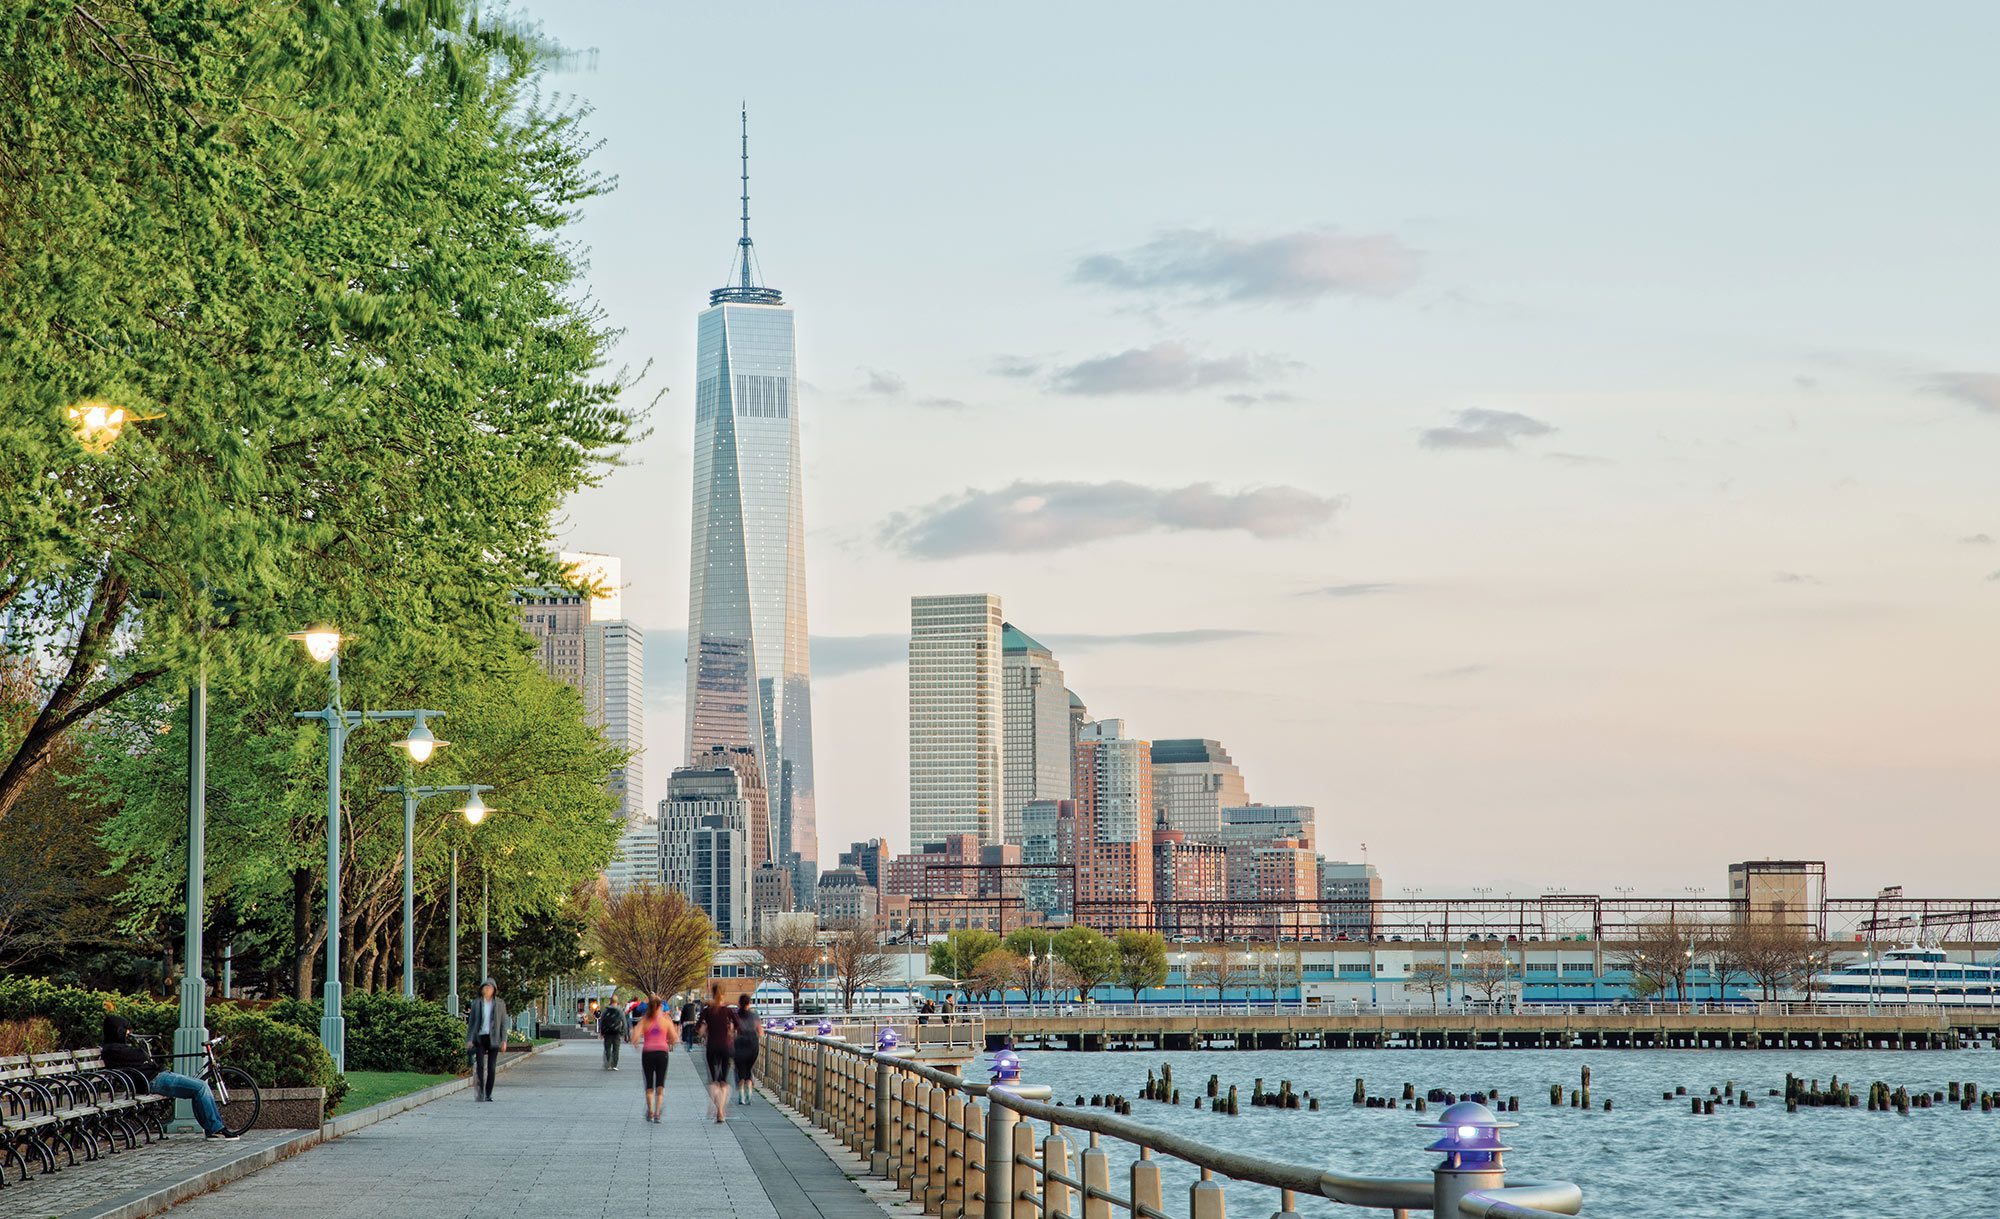 People walking and running on a sidewalk next to a river in New York City with One World Trade Center in the background.